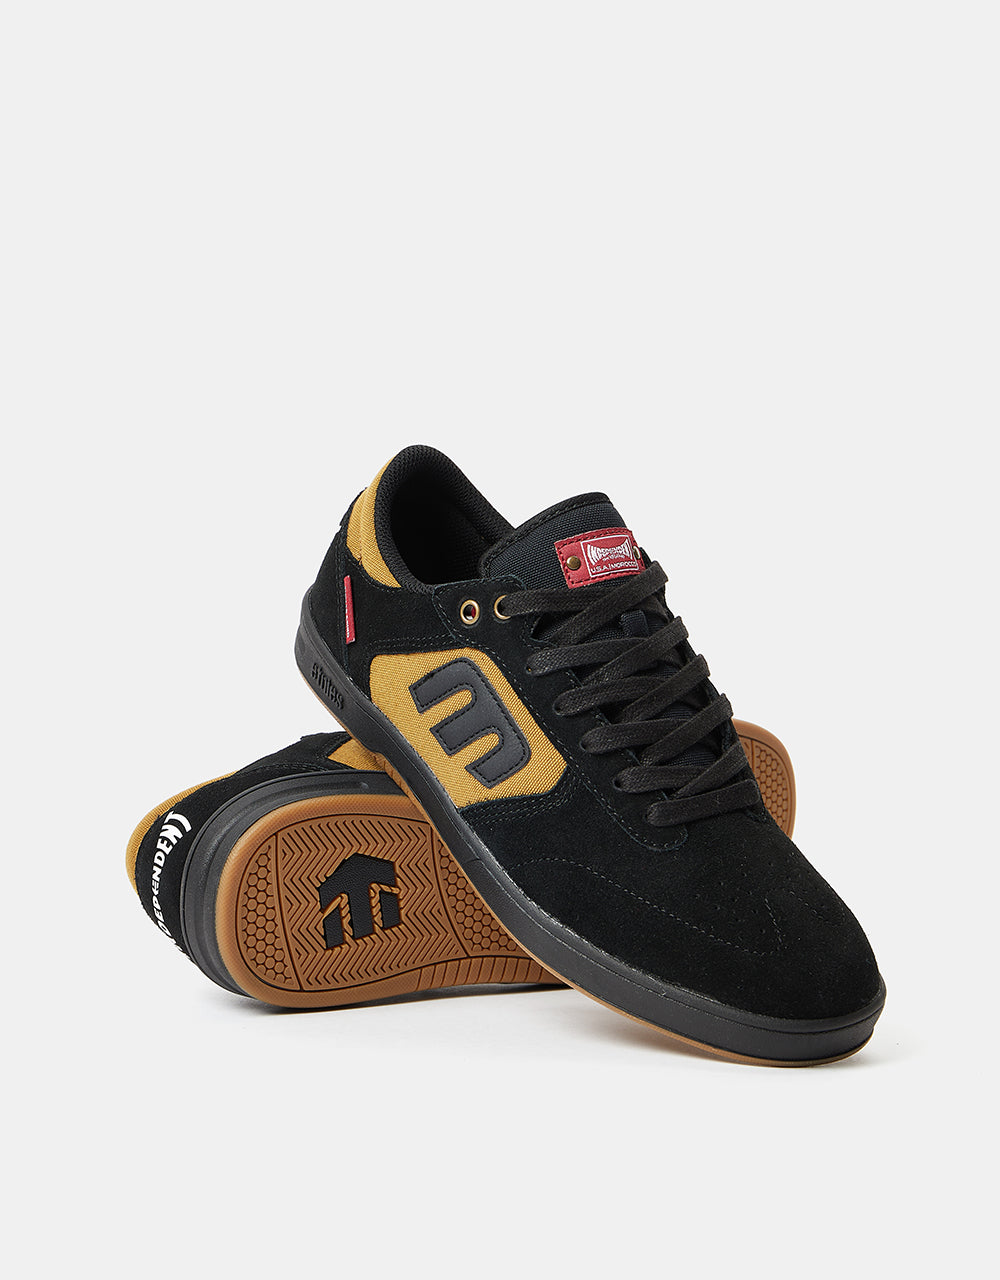 Etnies x Independent Windrow Skate Shoes - Black/Brown